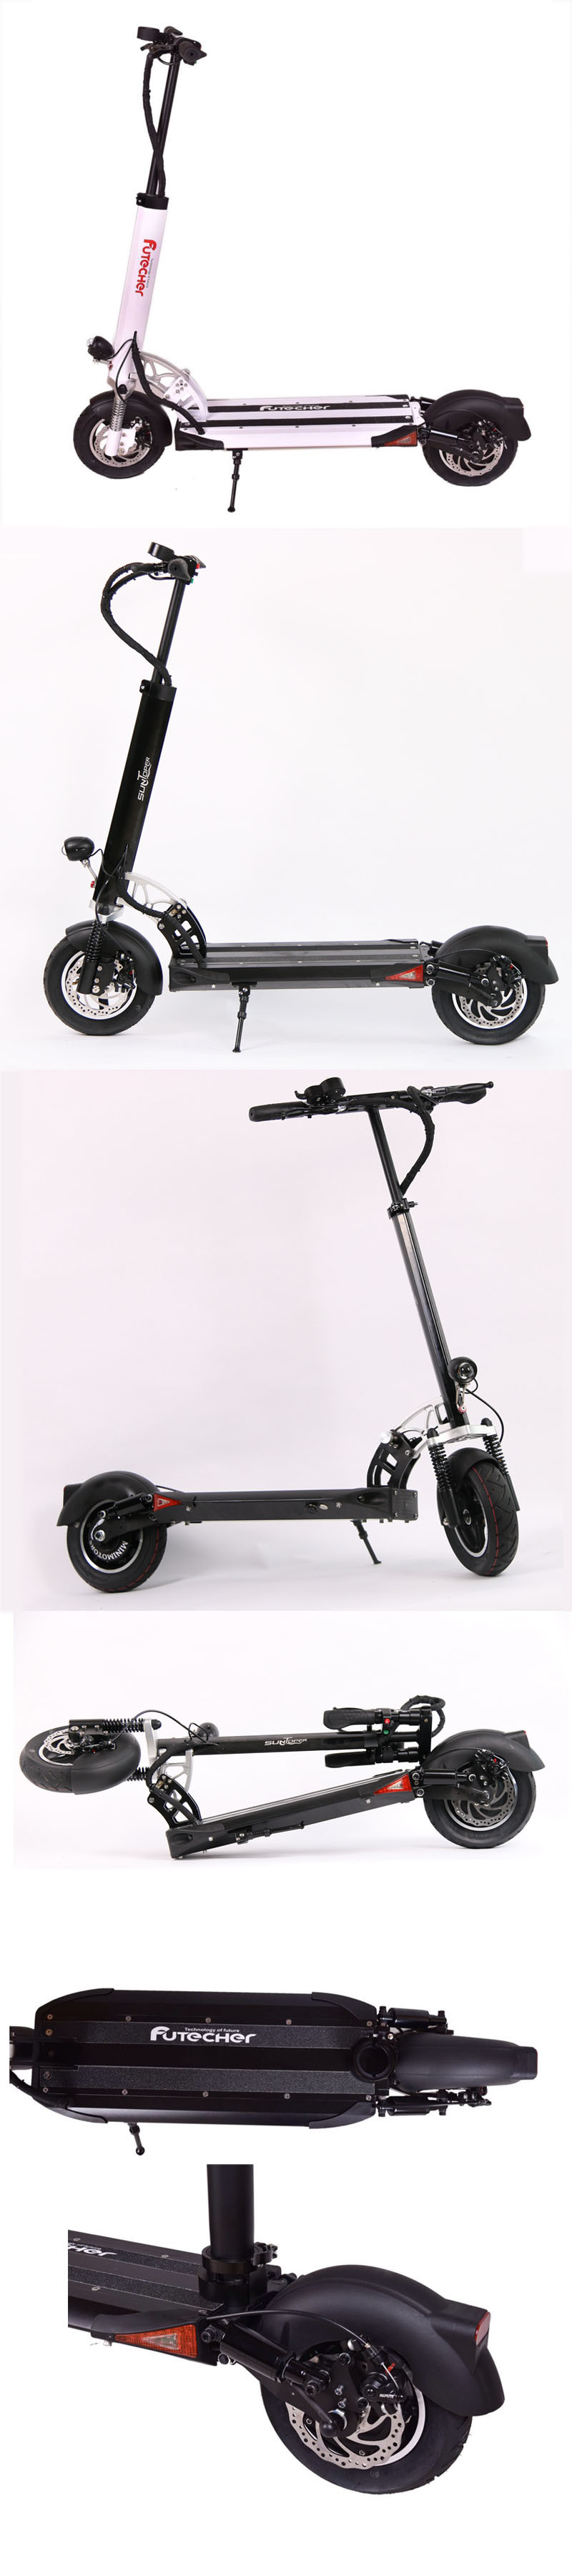 New Product Xiaomi 30km Long Life Mini Self Balancing 2 Wheel Folding Electric Scooter for Adult Best